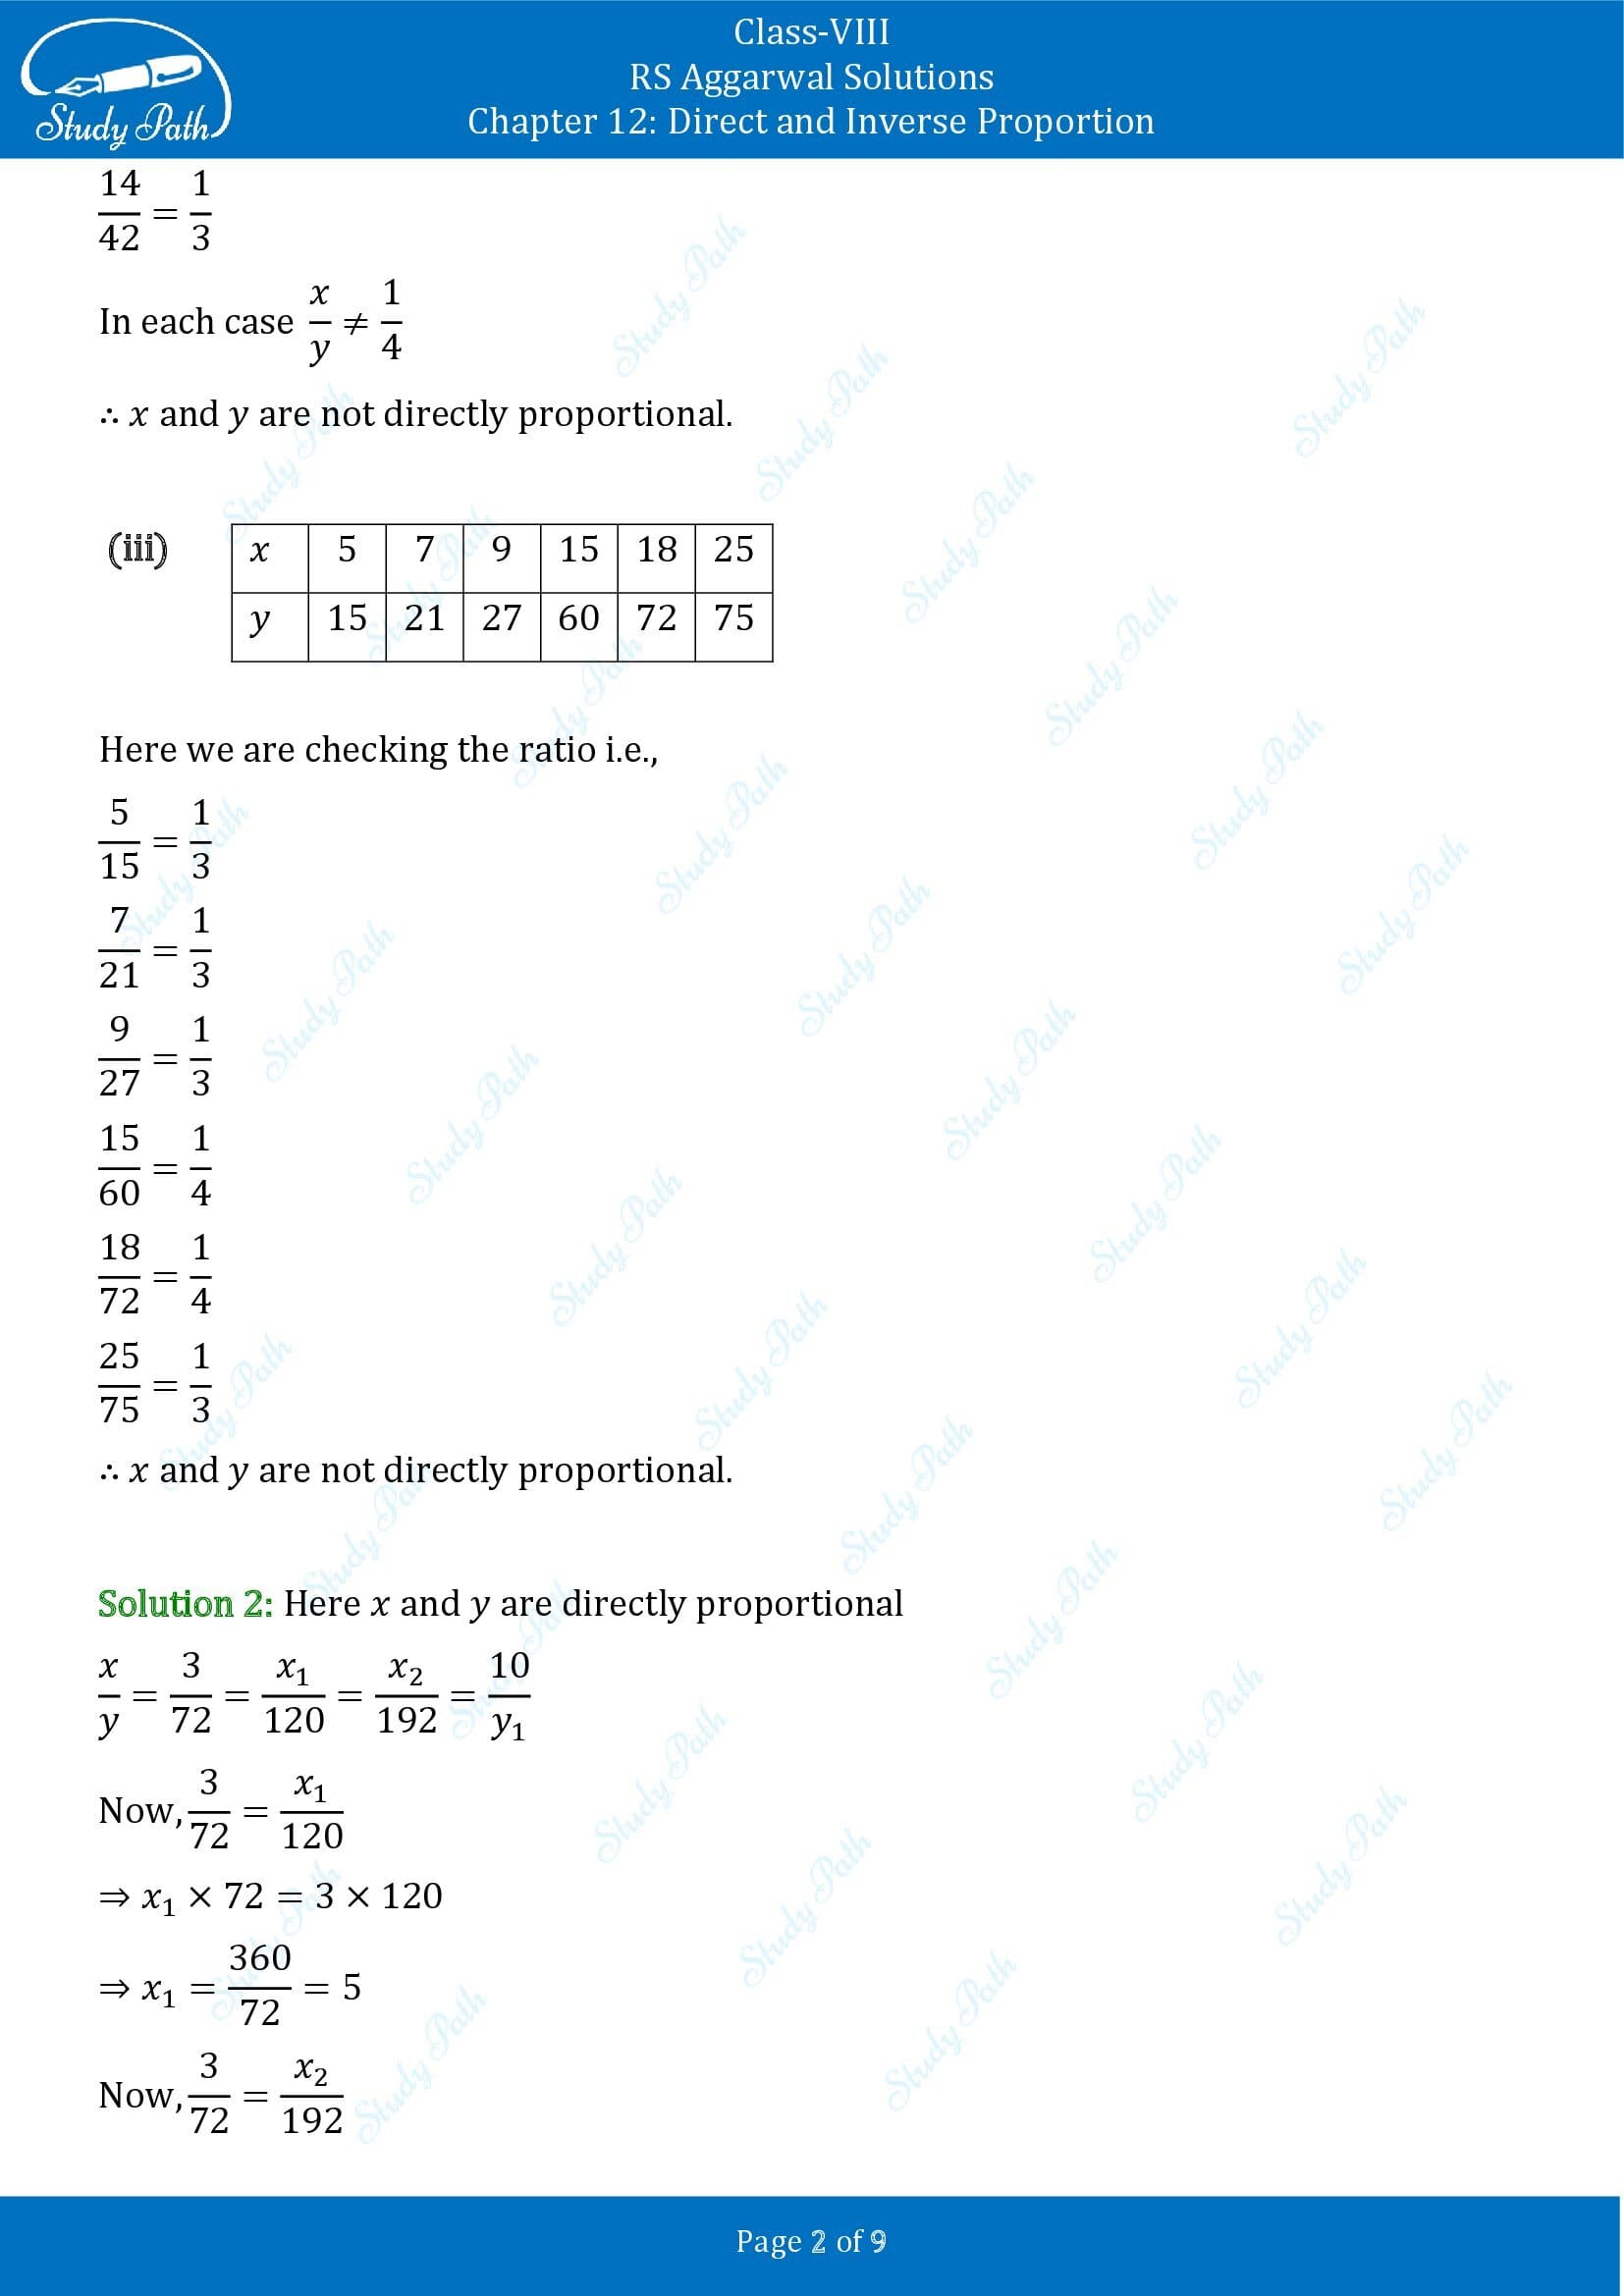 RS Aggarwal Solutions Class 8 Chapter 12 Direct and Inverse Proportion Exercise 12A 00002